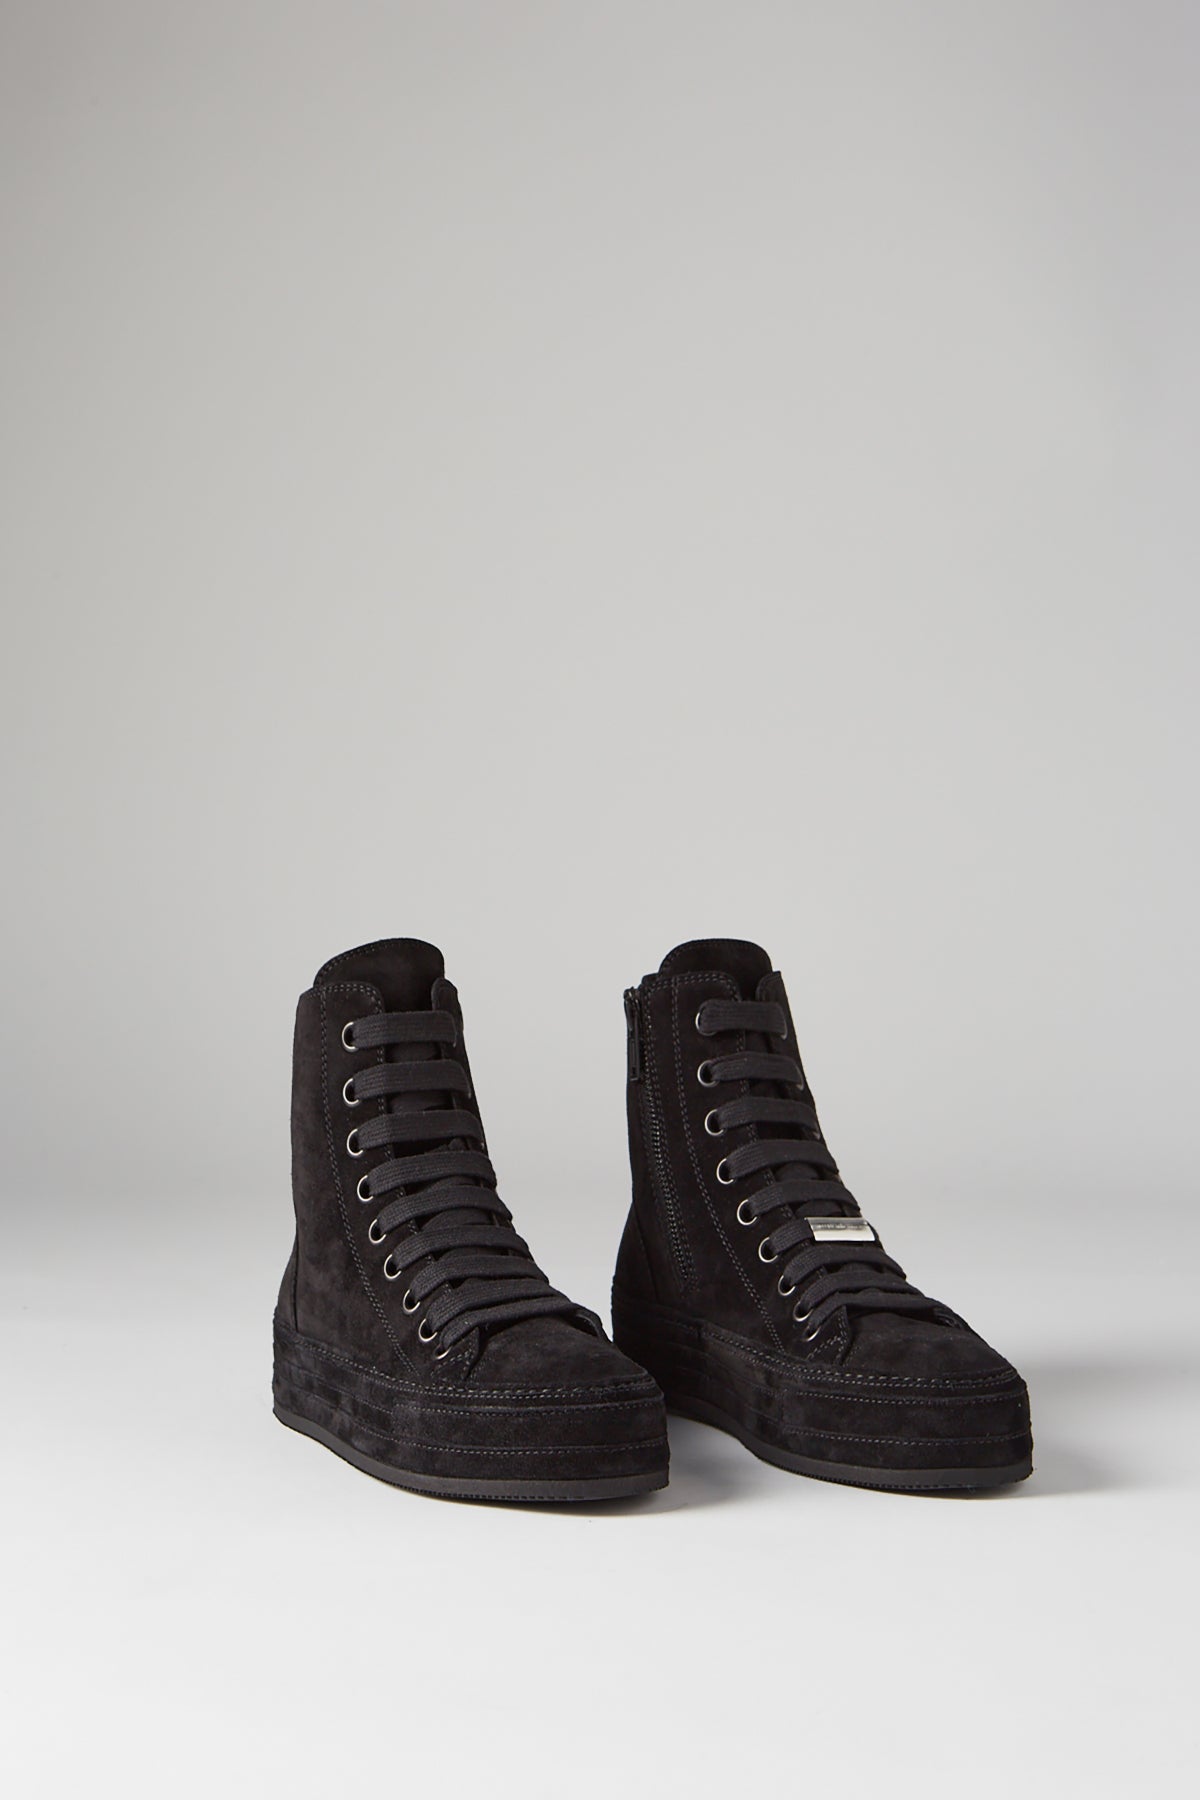 lied schoolbord waarom Sneakers Collection - Ann Demeulemeester